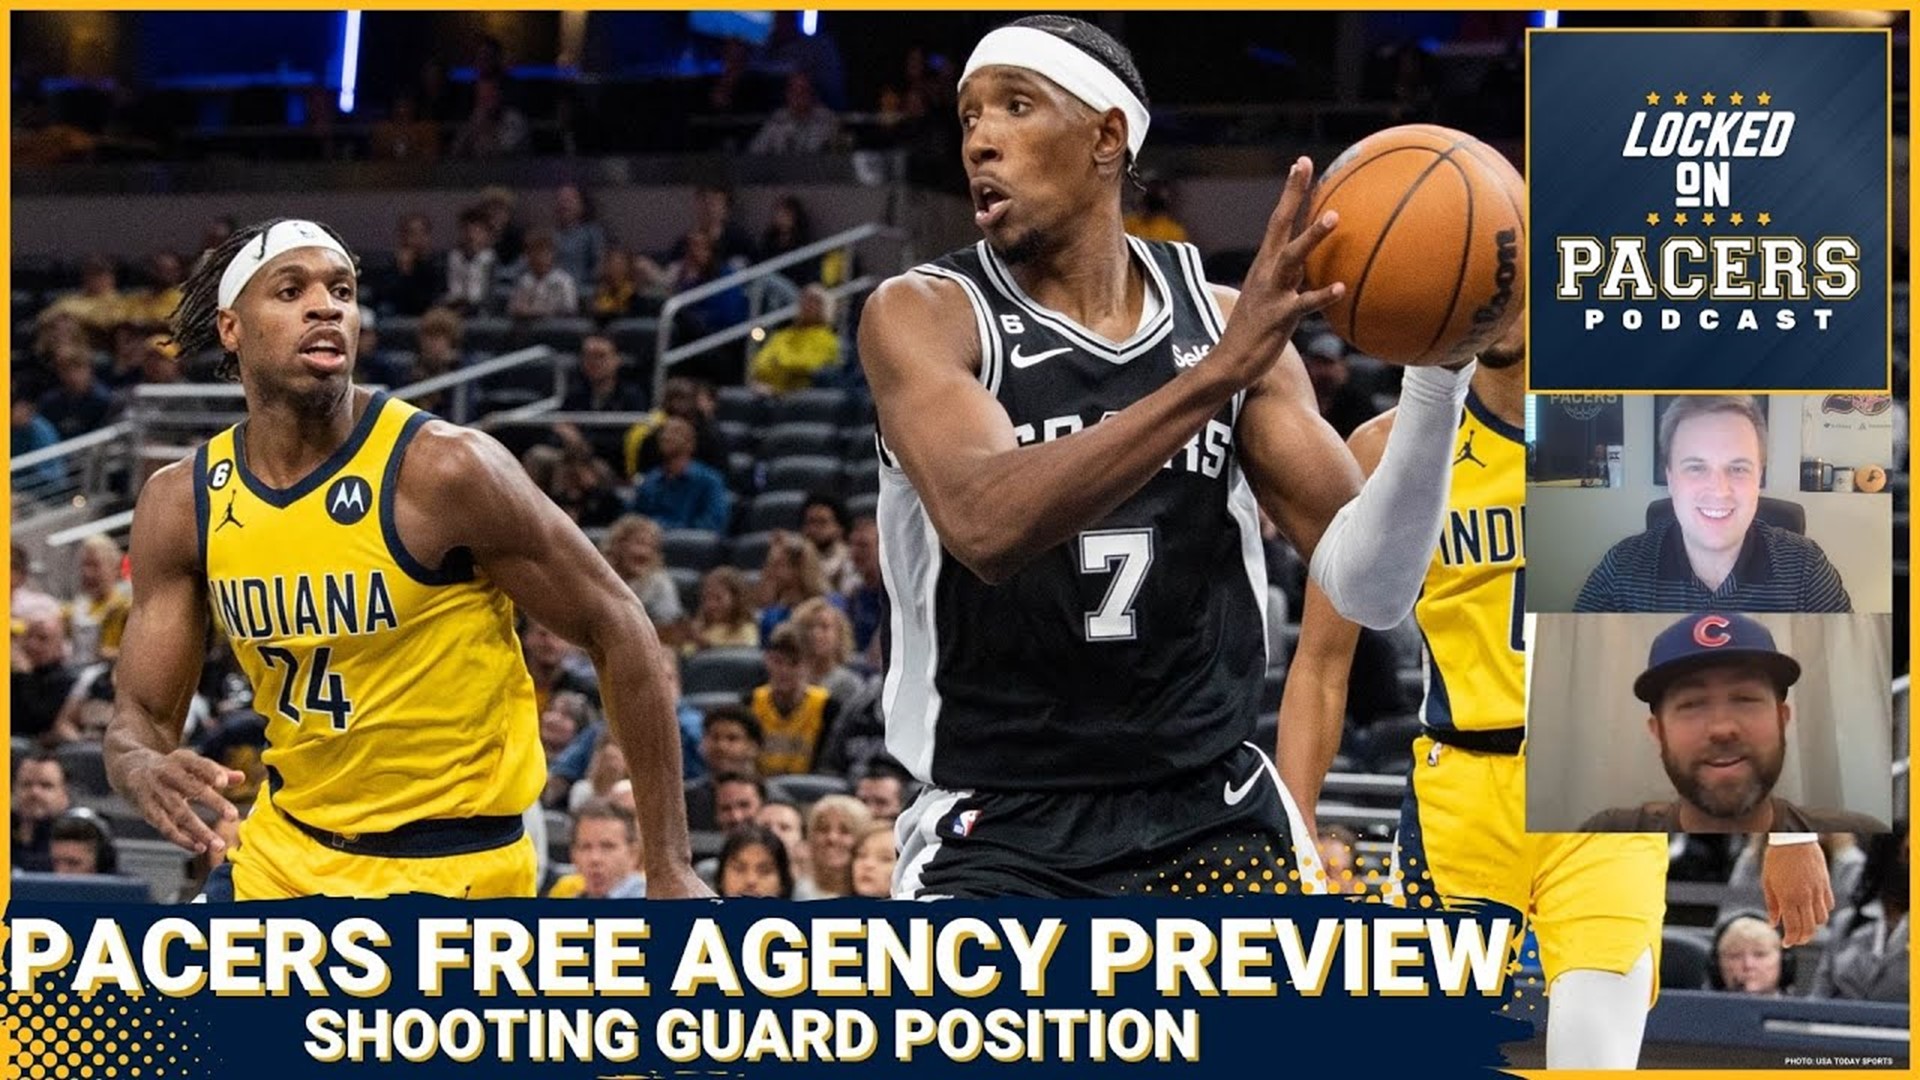 Indiana Pacers free agency preview, shooting guard position